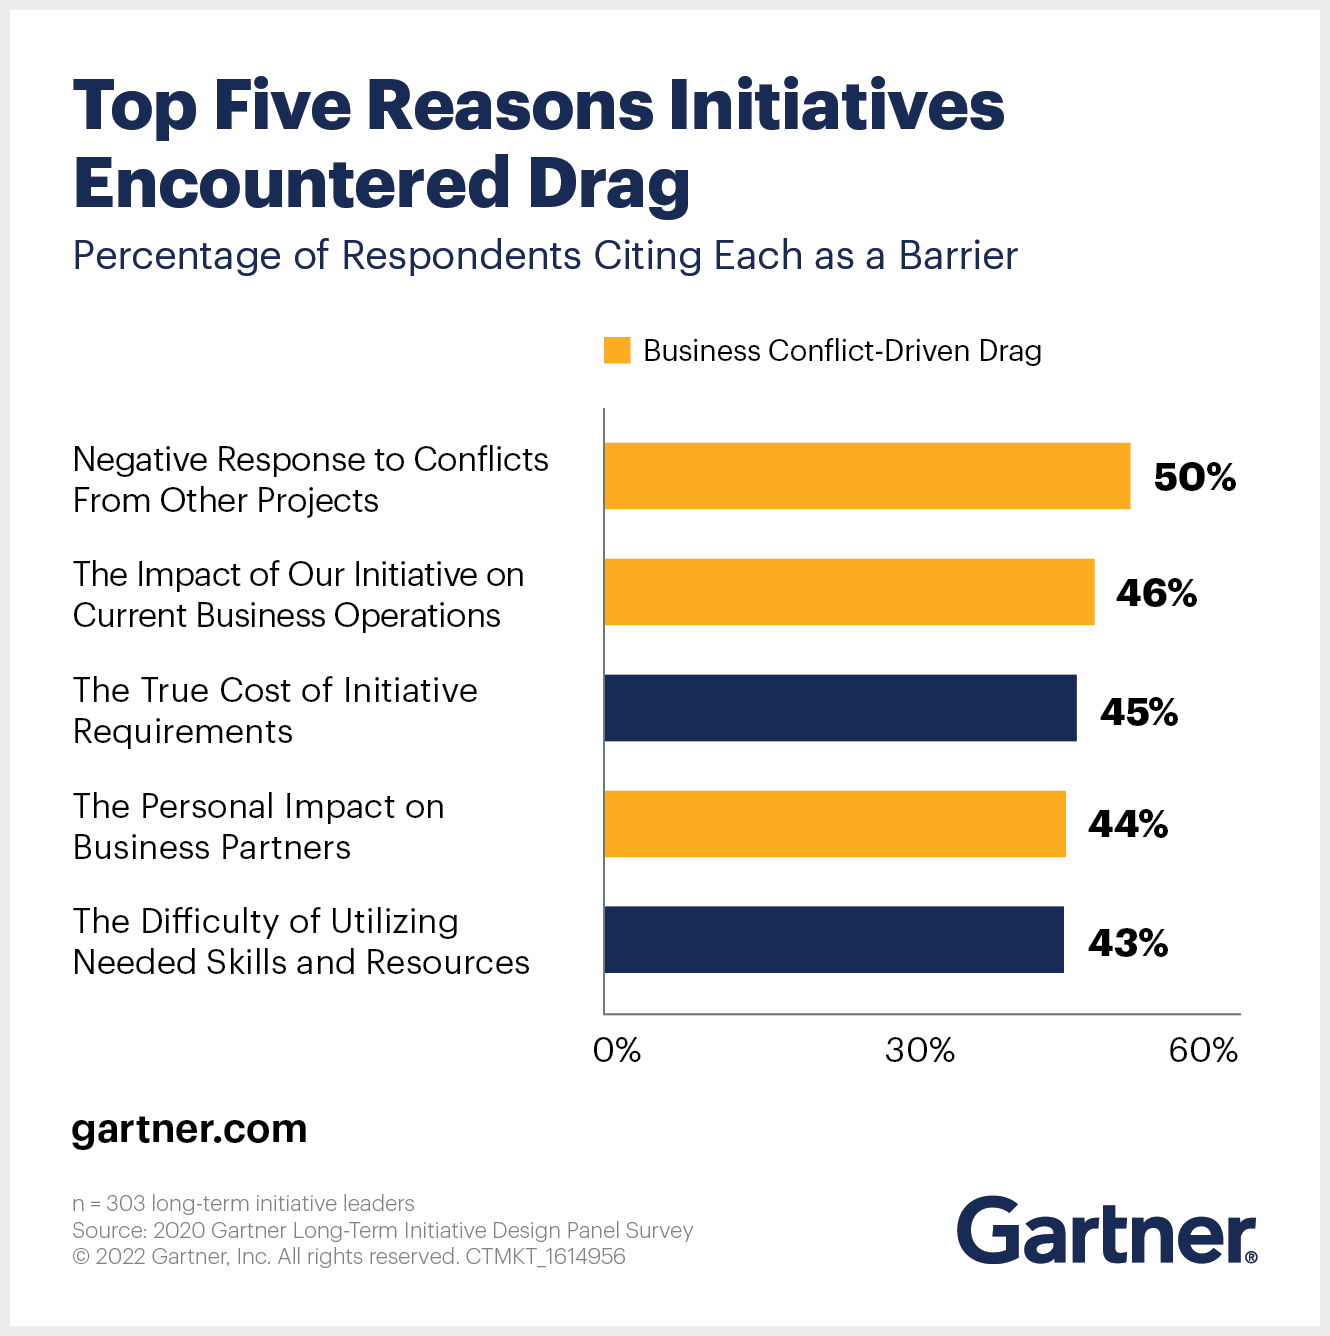 Top Five Reasons Initiatives Encountered Drag